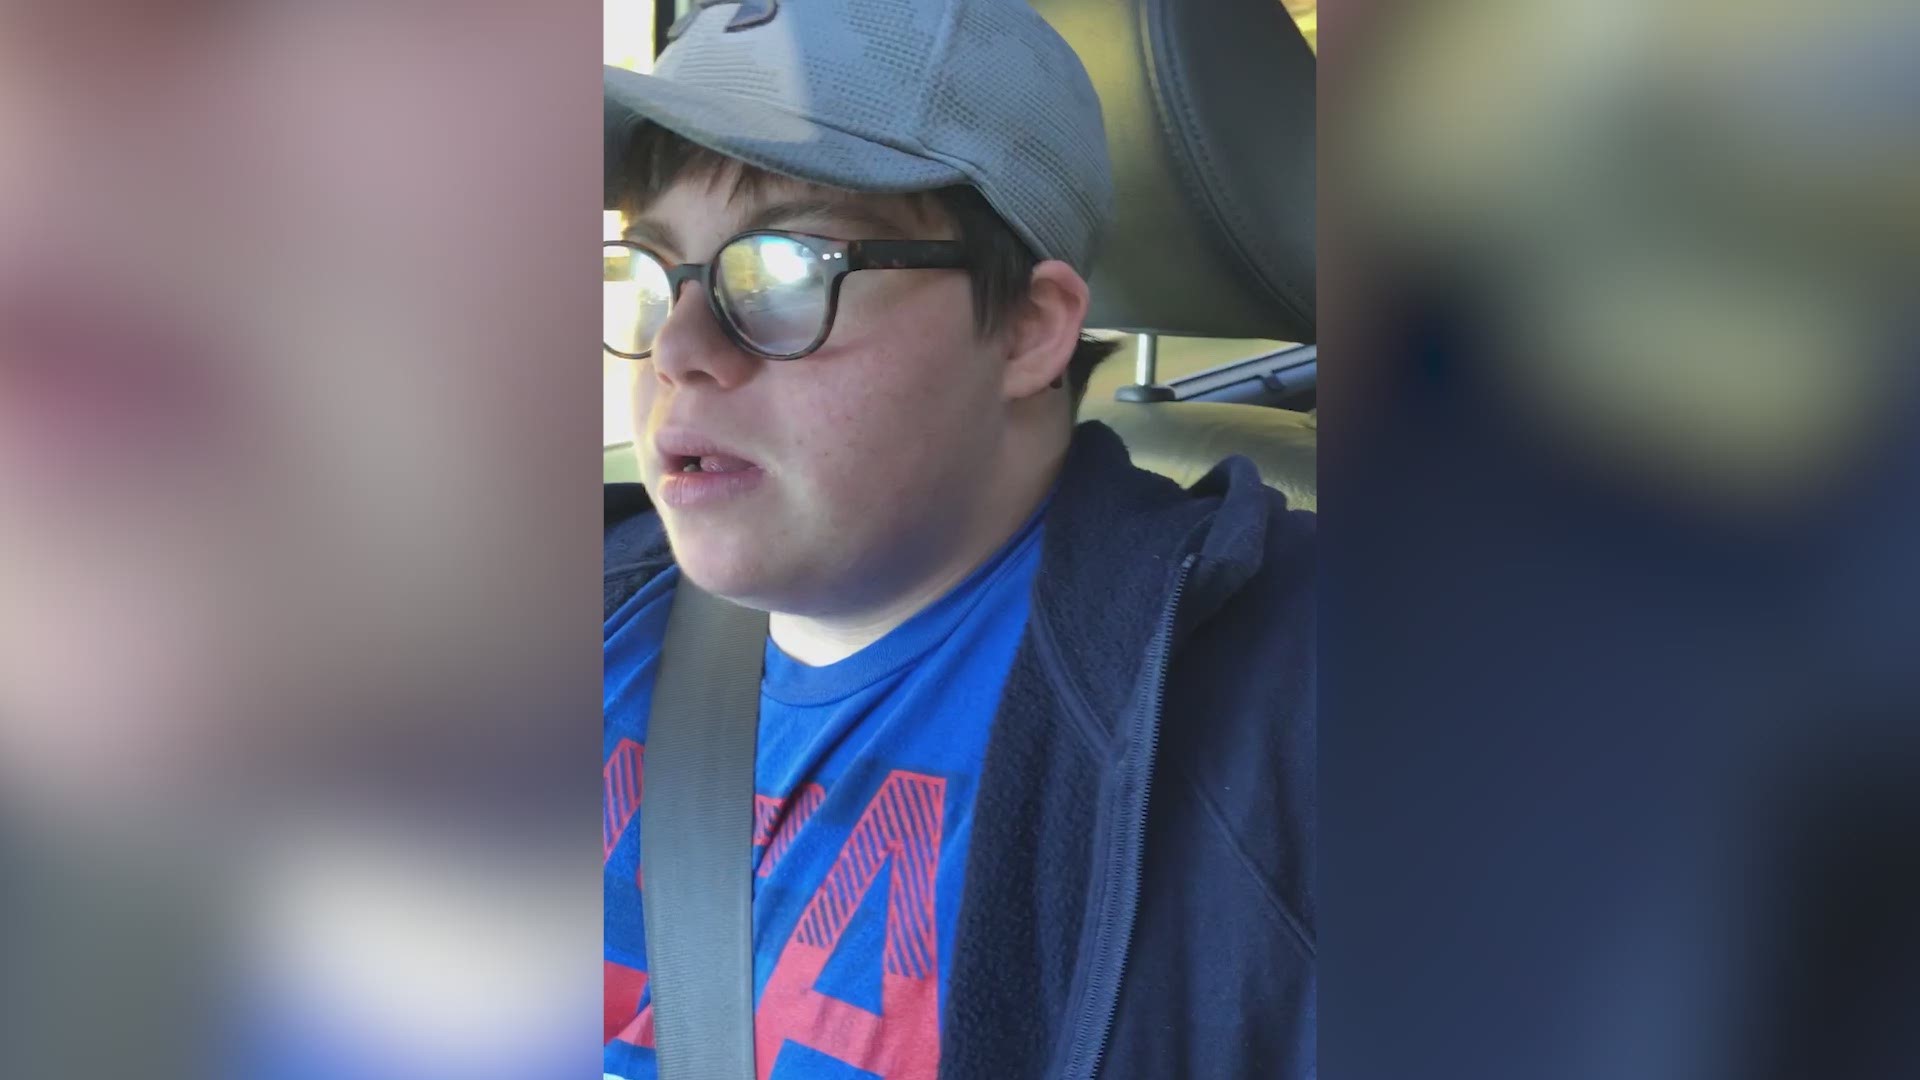 Jake Manning's personality shines while having fun singing in the car.